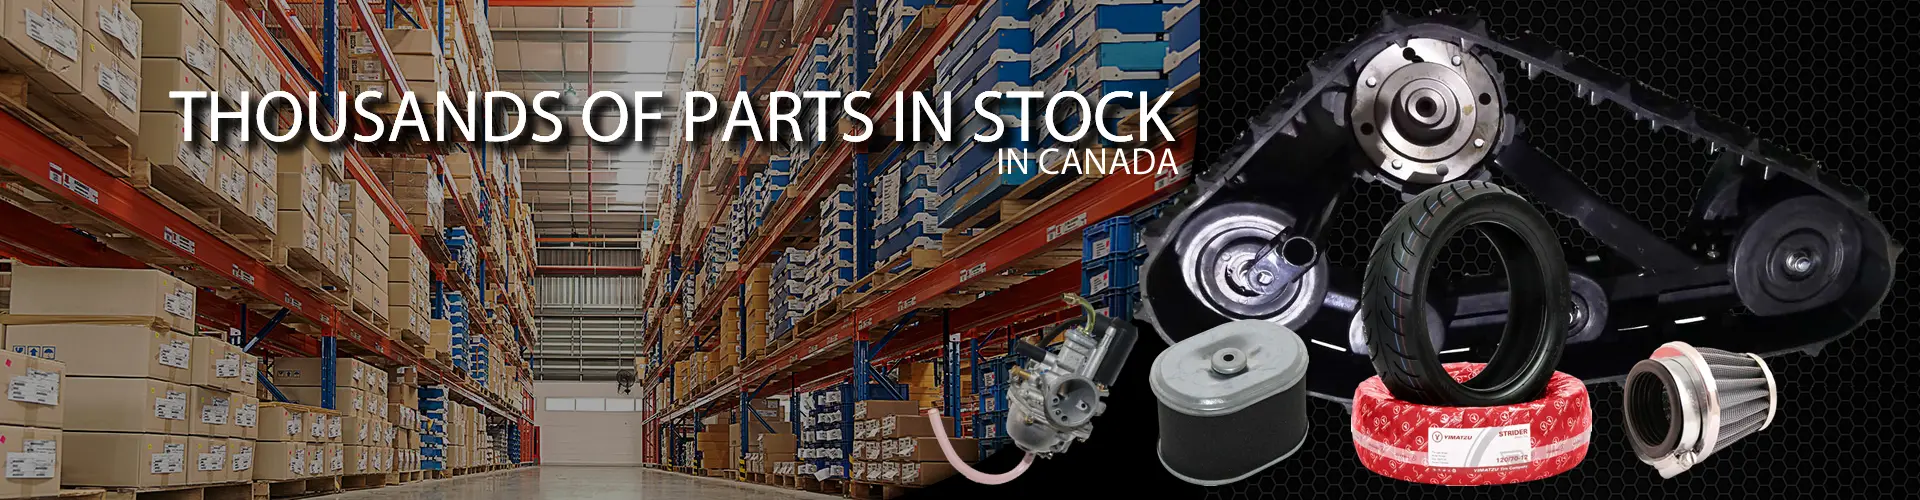 We have Thousands of parts in stock in Canada